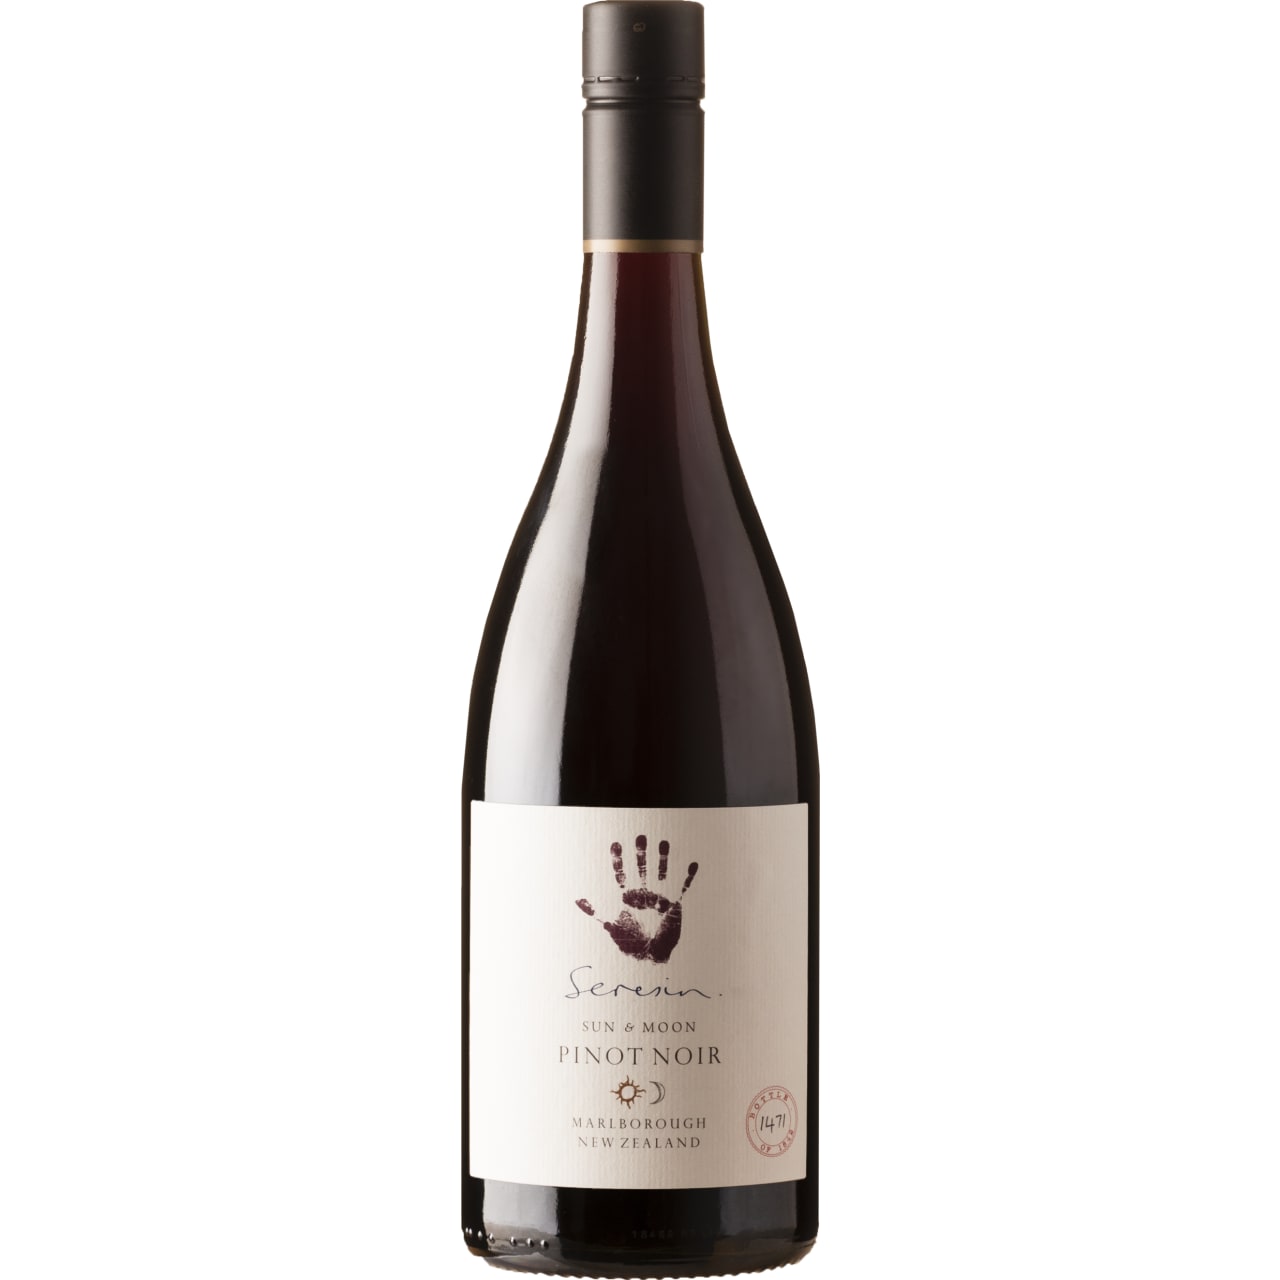 Dense, rich and very powerful wine, it possesses layers of dark cherry, raspberry, plum, oriental spices, nutty oak and savoury dried herb flavours.